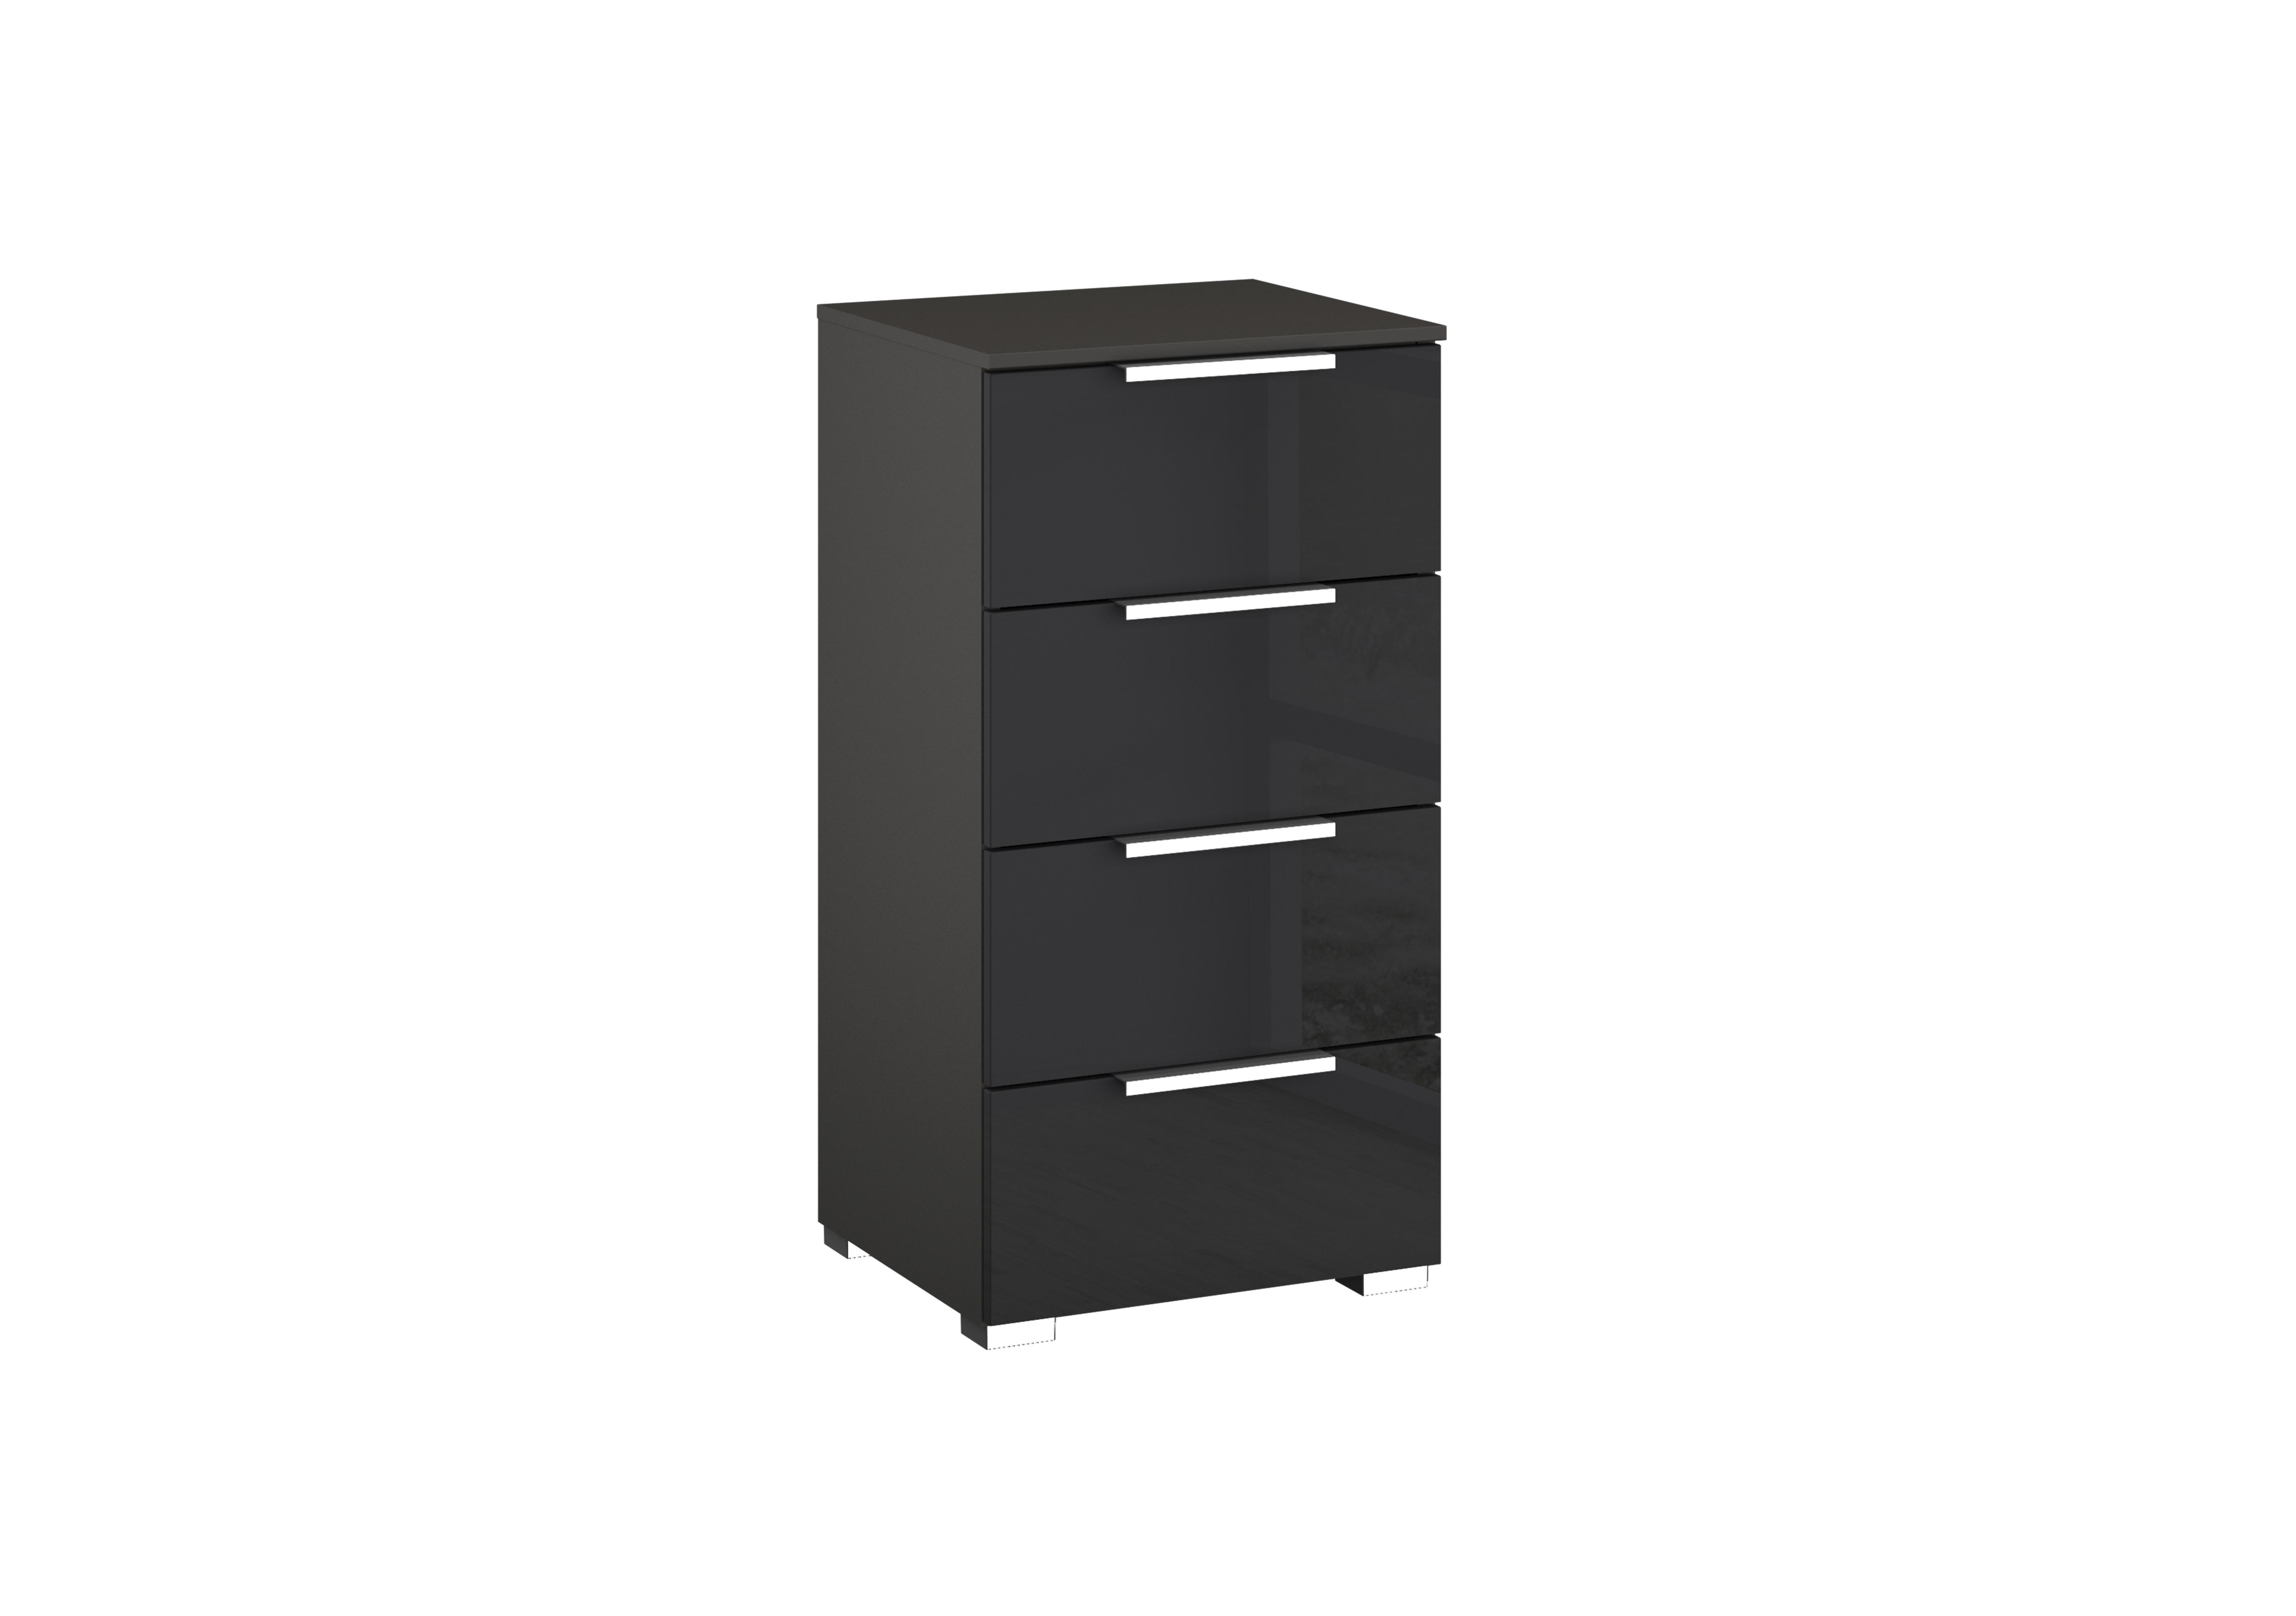 Formes Glass 4 Drawer Narrow Chest in A140b Graphite Basalt Front on Furniture Village